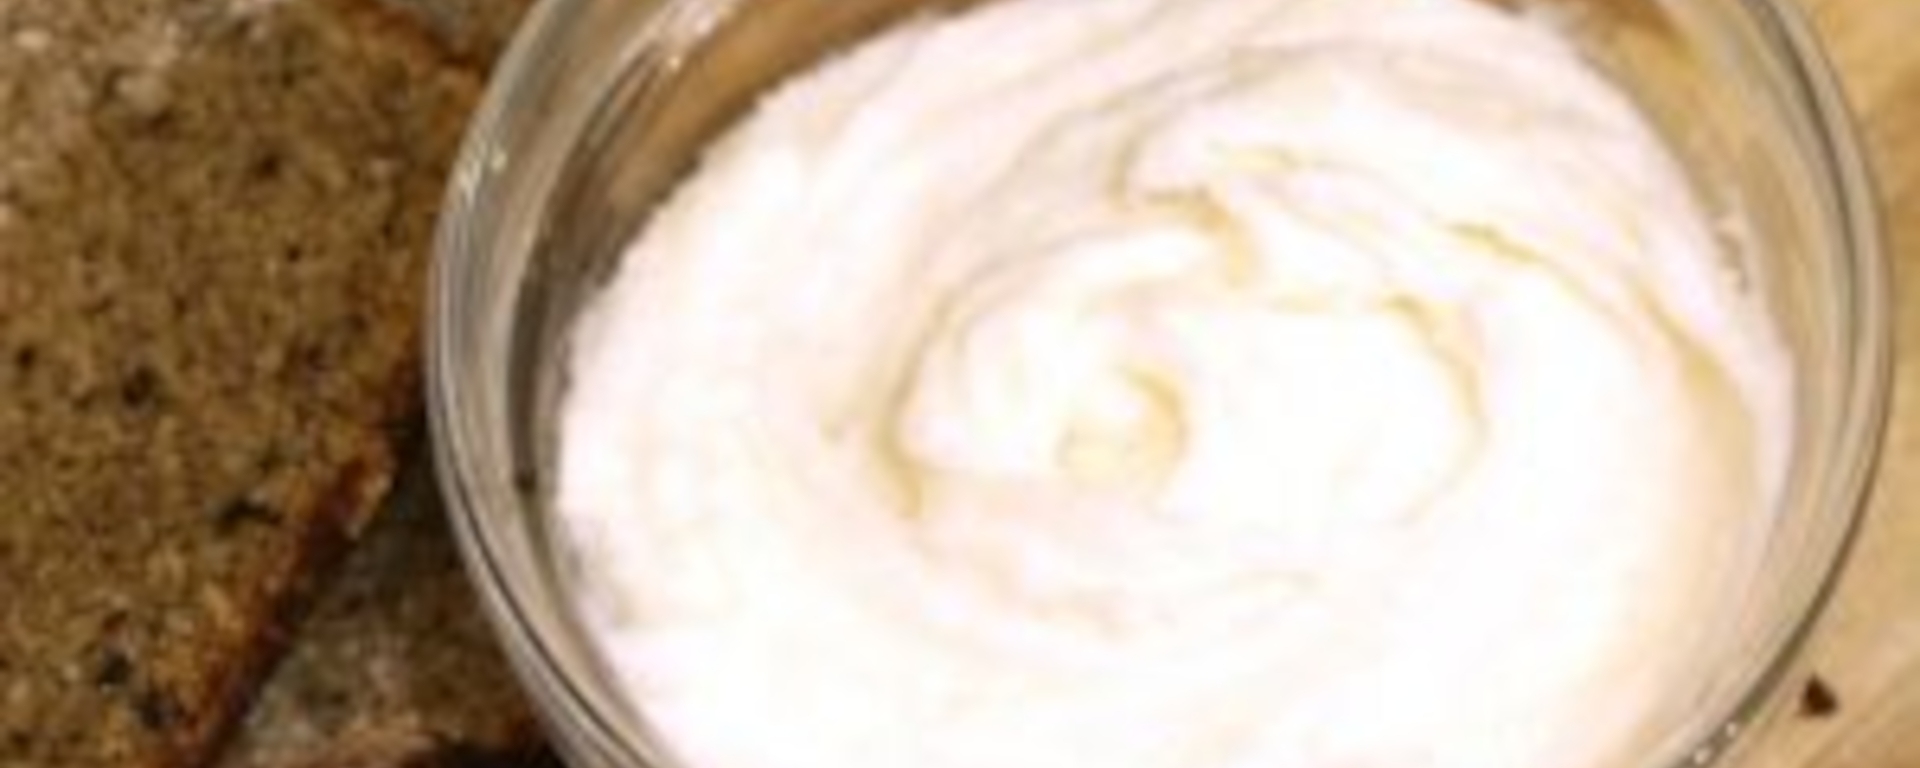 LuvMyRecipe.com - Cream Cheese Frosting Featured